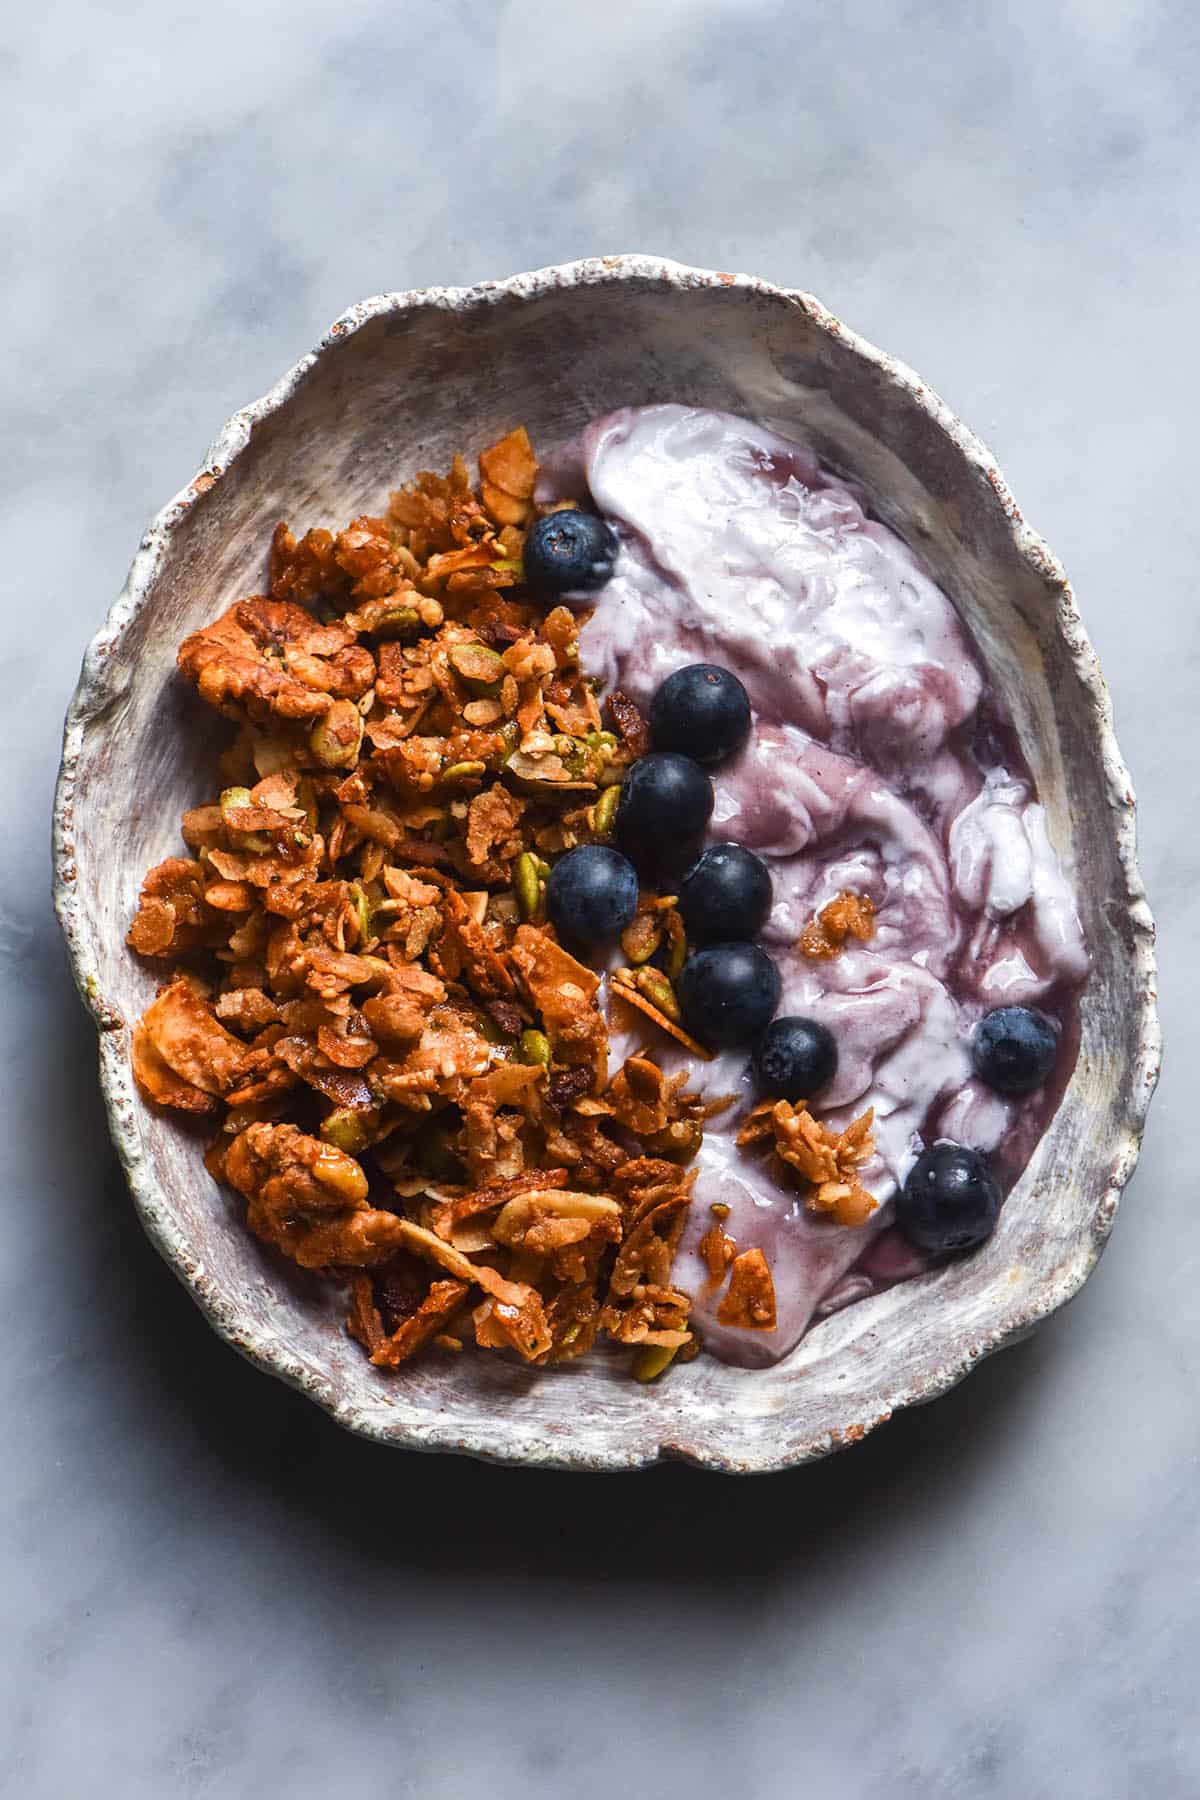 An aerial image of a white misshapen ceramic bowl on a white marble table filled with blueberry yoghurt and granola and topped with fresh blueberries.